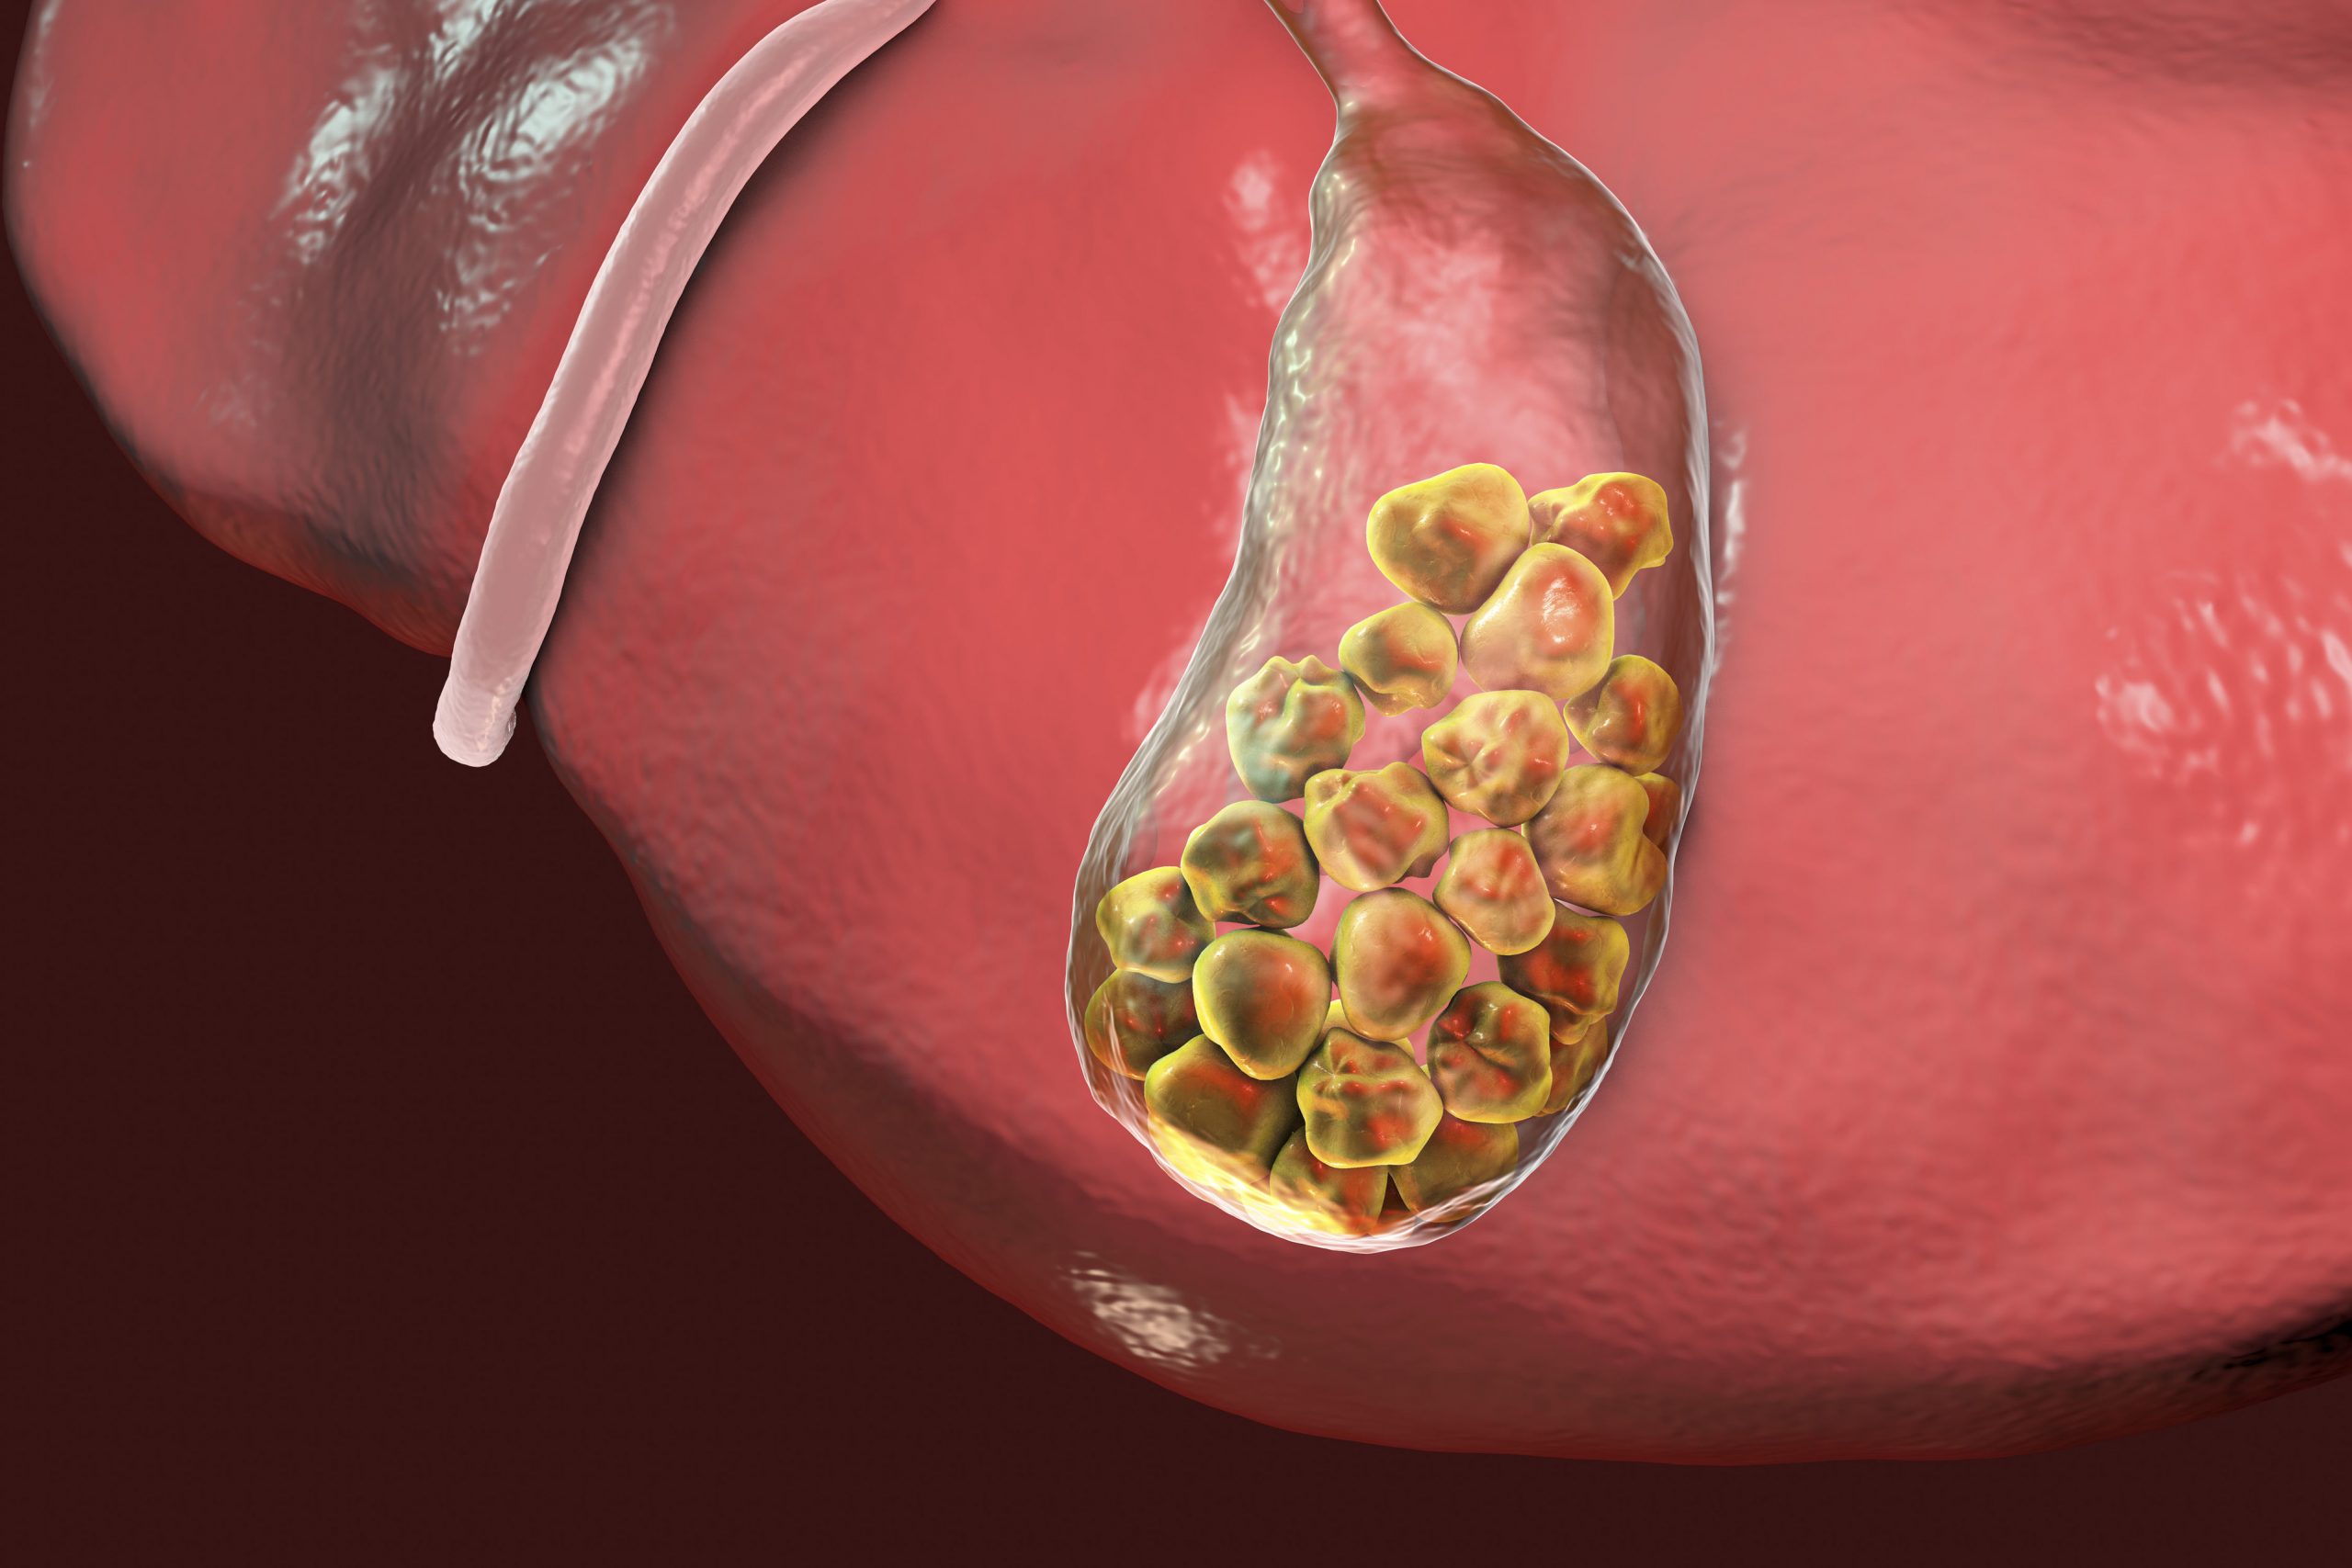 80600184 - gallstones, 3d illustration showing bottom view of liver and gallbladder with stones